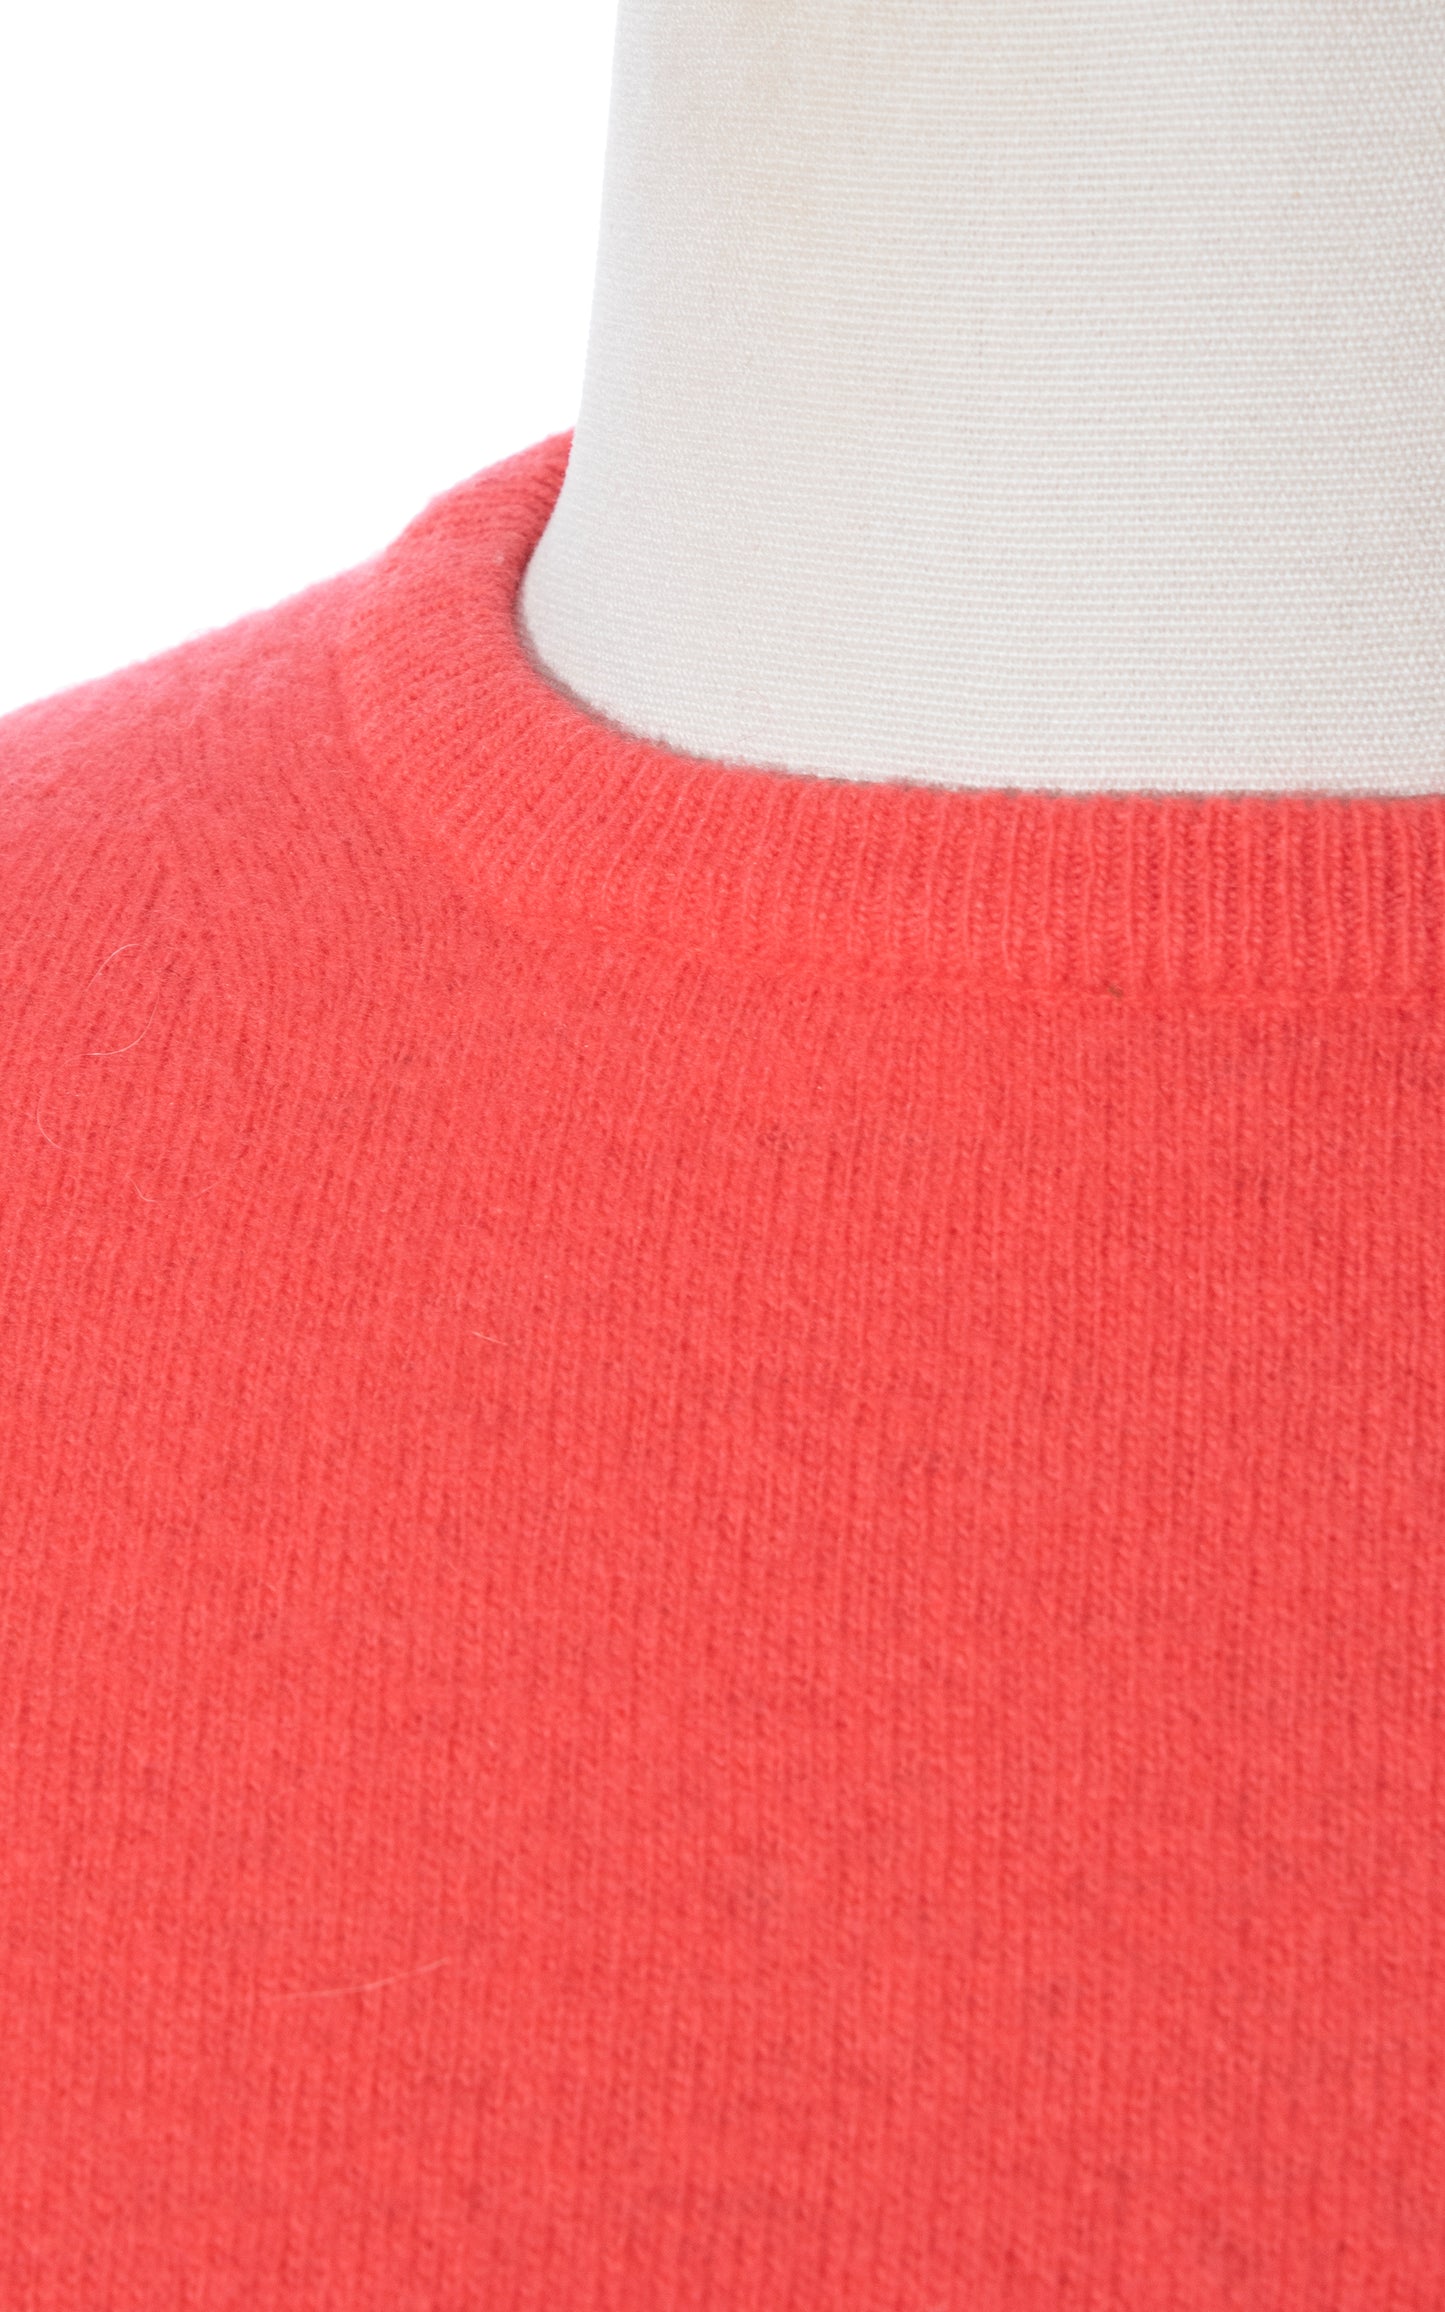 Vintage 40s 50s 1940s 1950s Hot Salmon Pink Knit Wool Short Sleeve Sweater Top Birthday Life Vintage